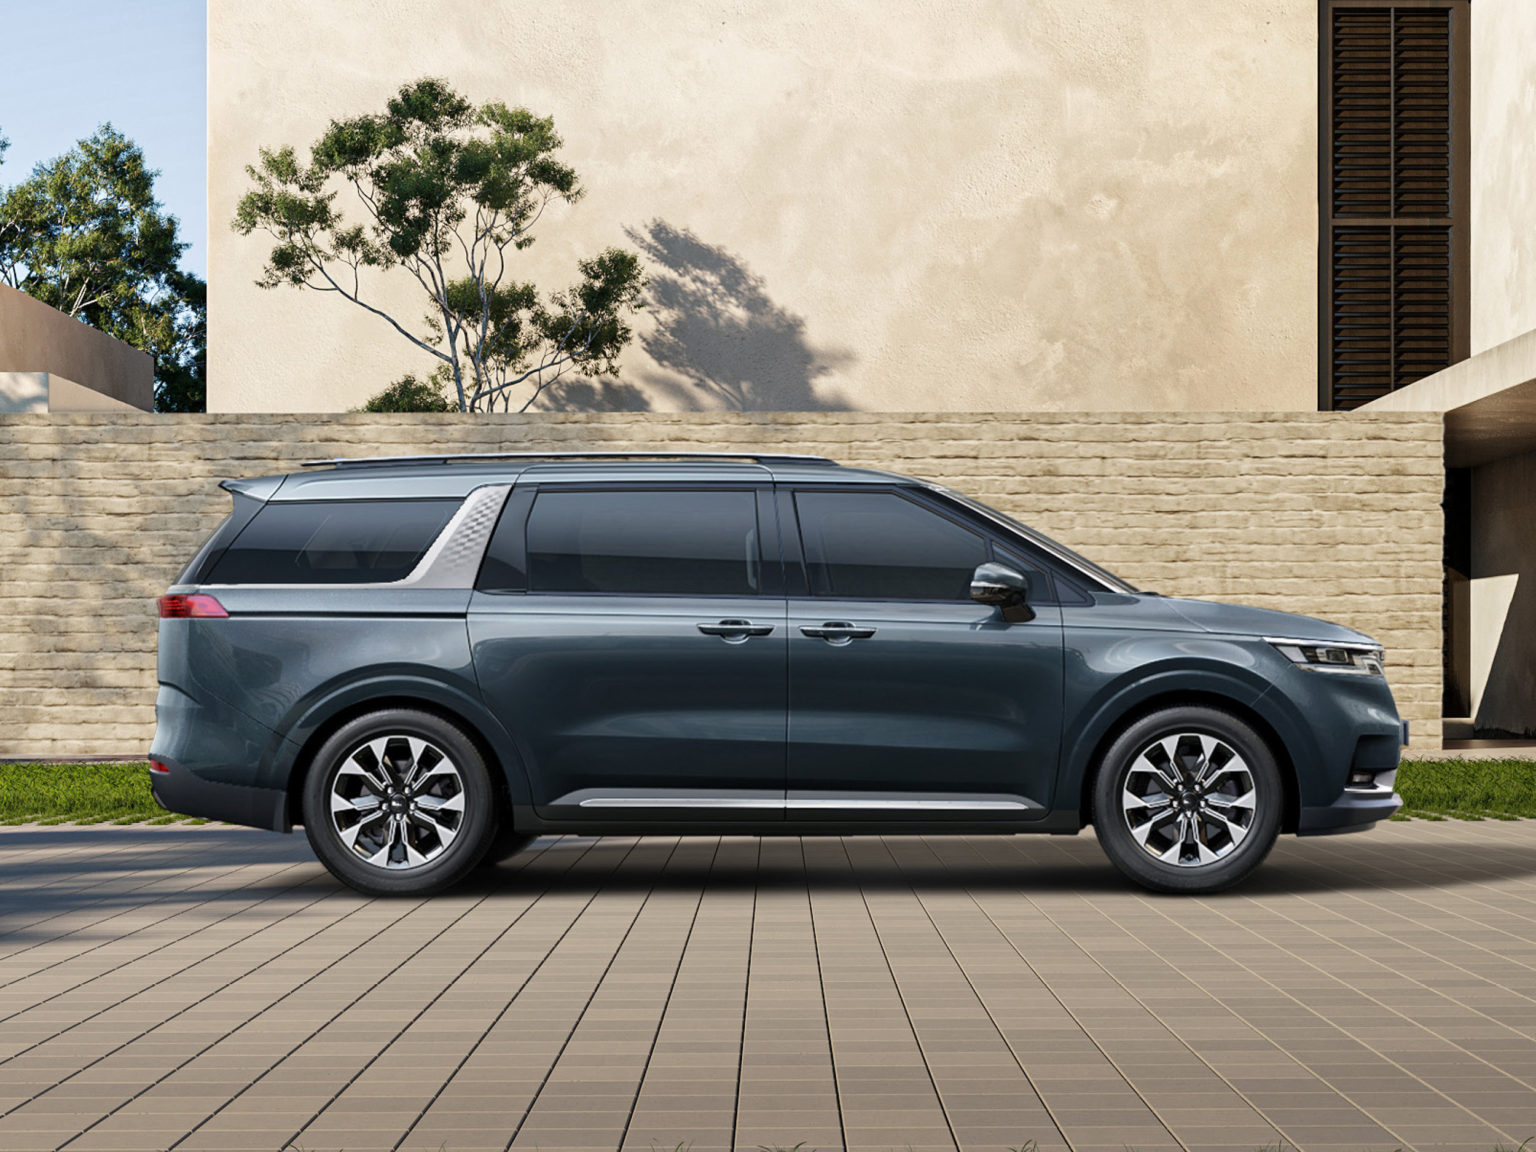 Kia has combined the convenience of a minivan with the design of an SUV.